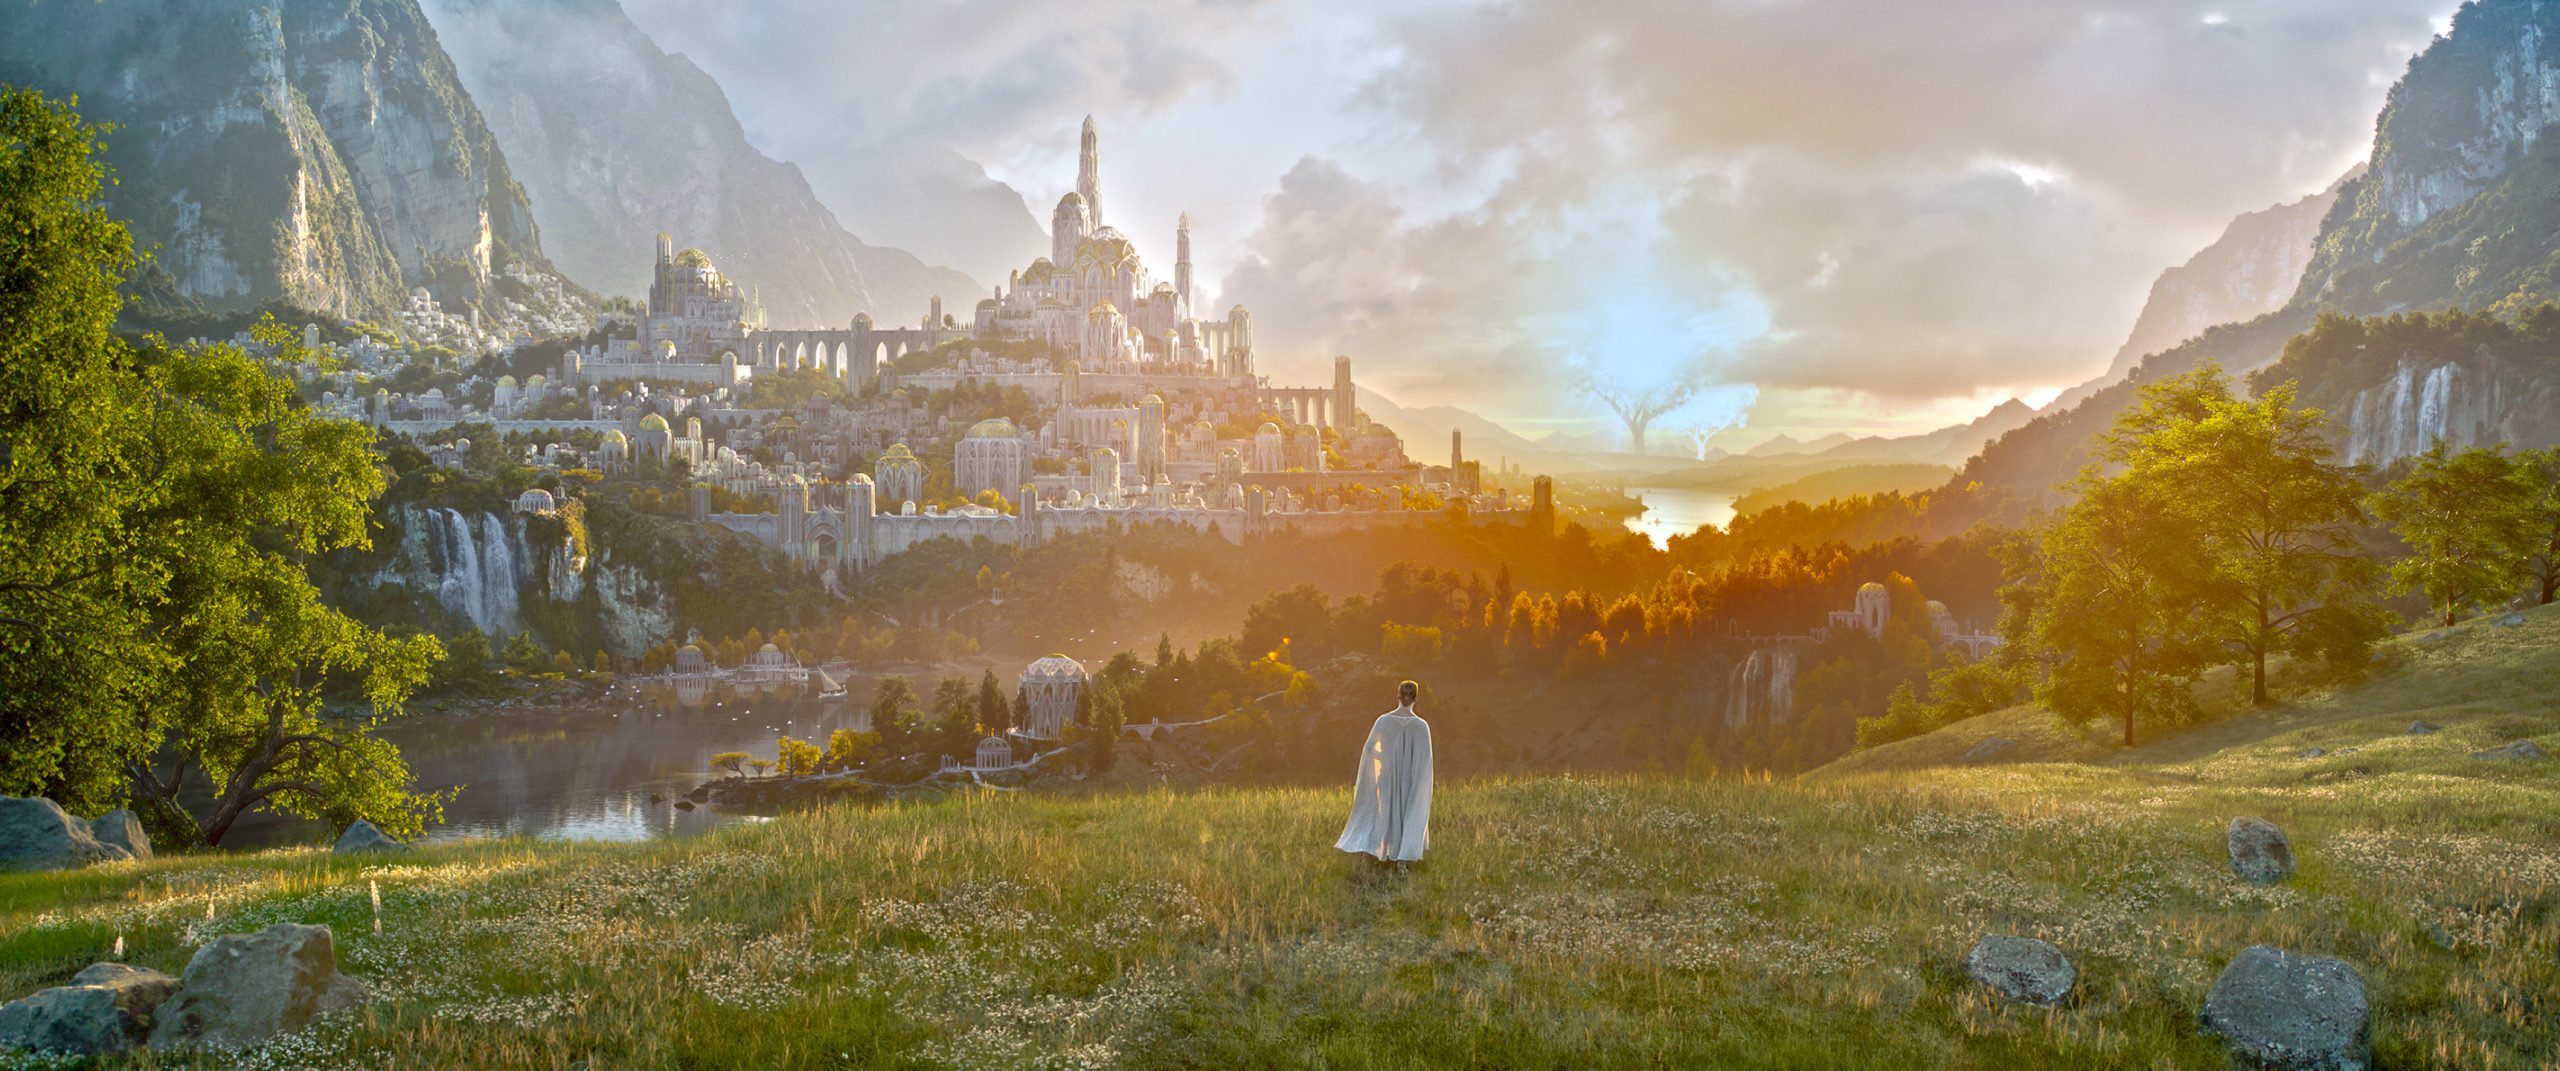 Amazon moves Production to UK for Season 2 of Lord of the Rings TV series